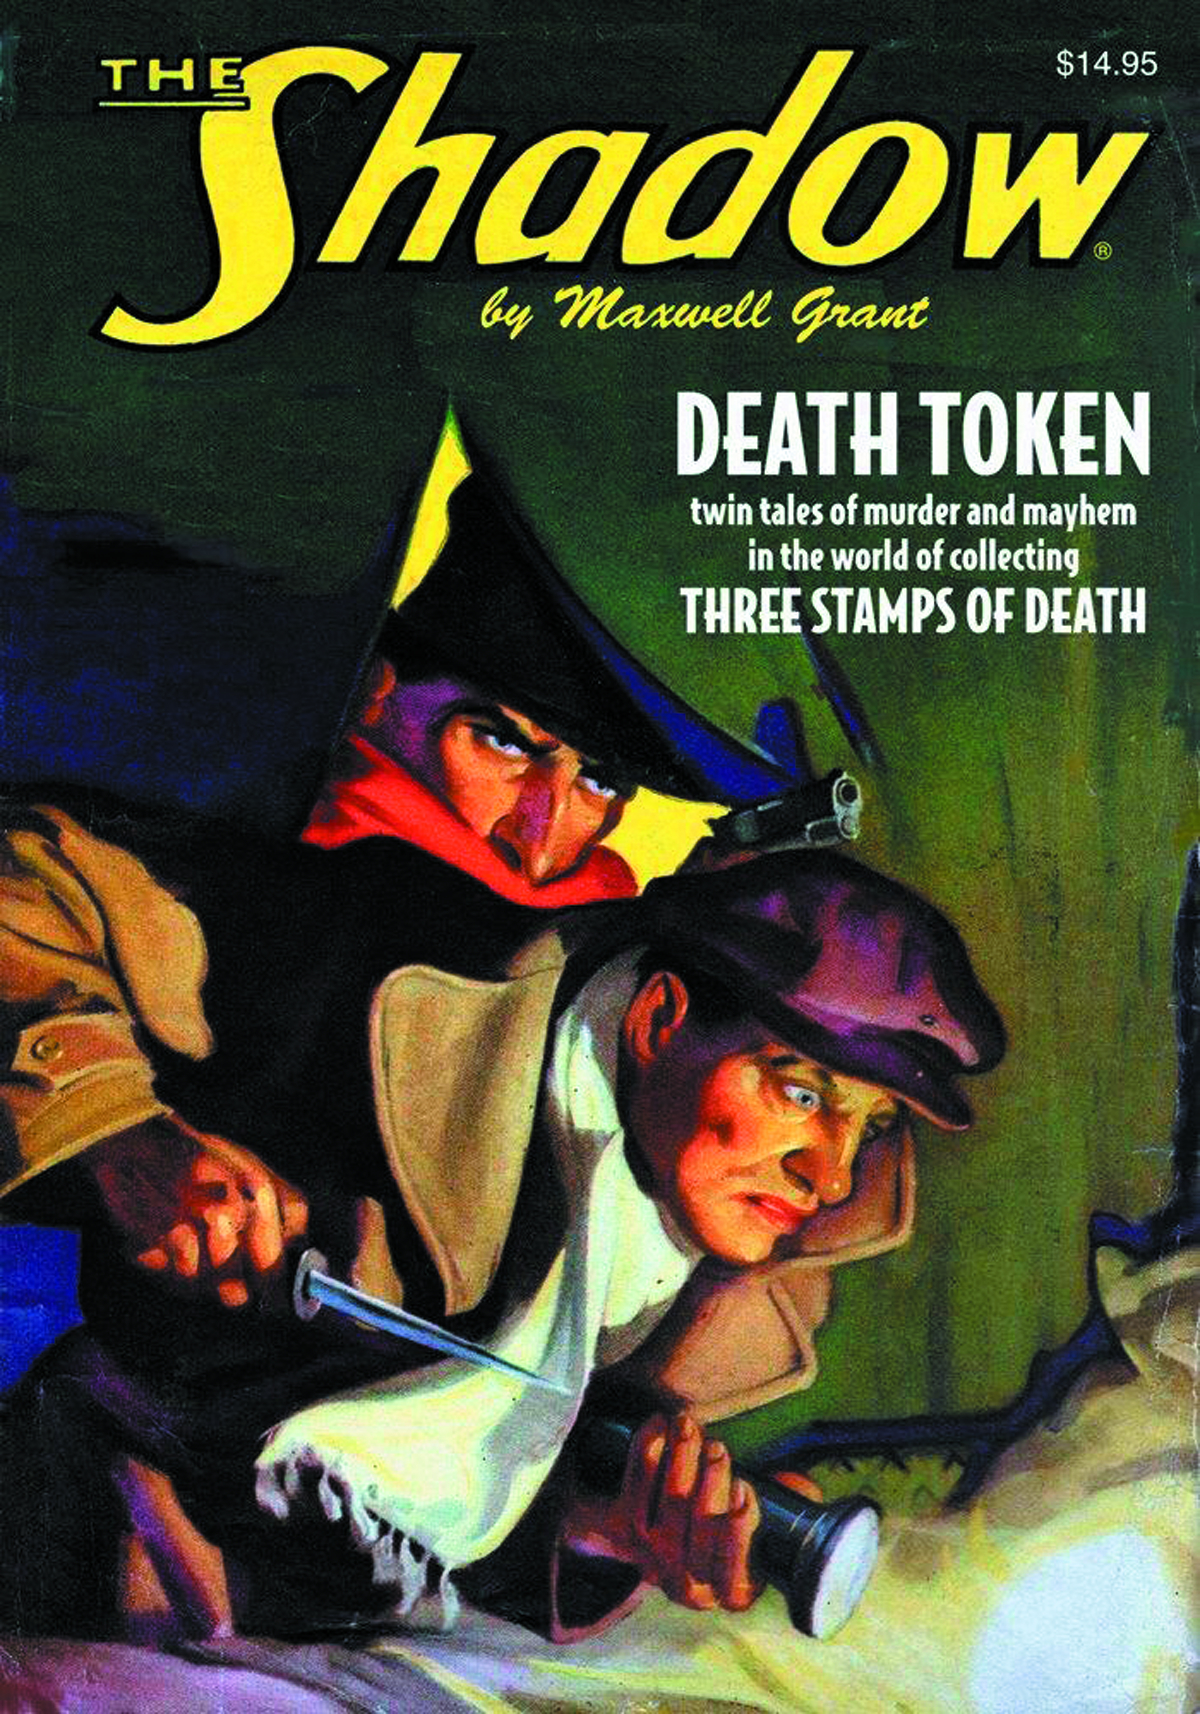 SHADOW DOUBLE NOVEL VOL 112 DEATH TOKEN & 3 STAMPS OF DEATH